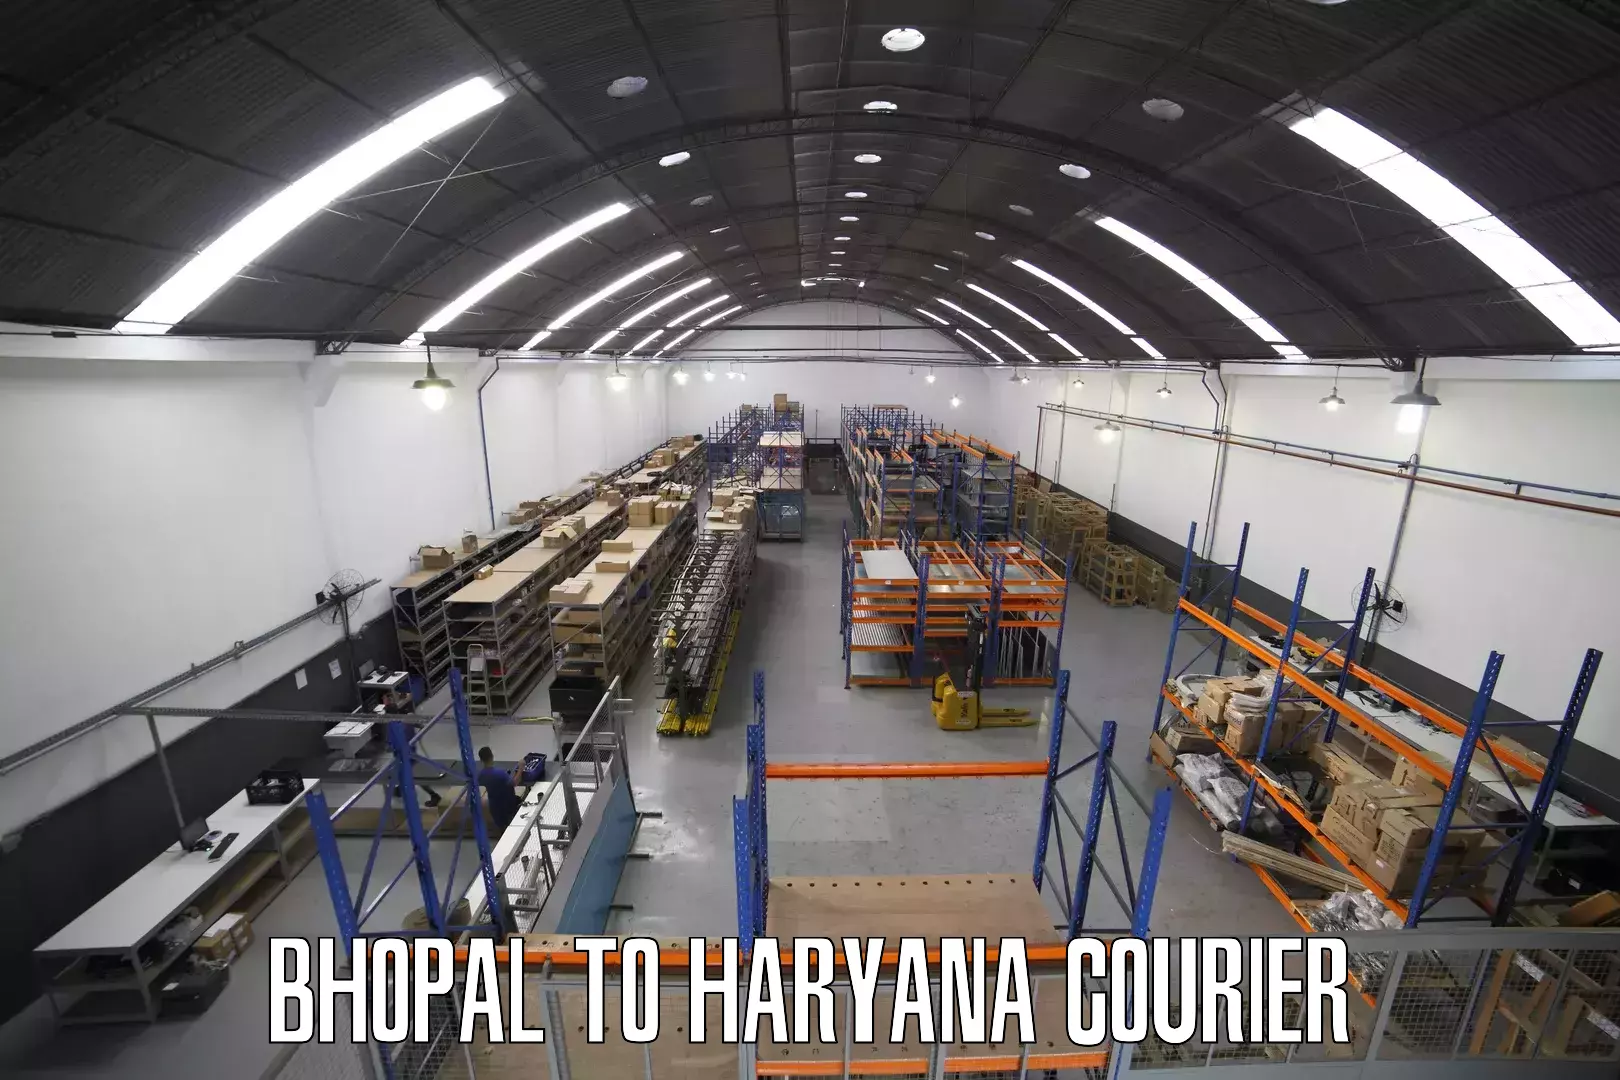 State-of-the-art courier technology Bhopal to IIIT Sonepat